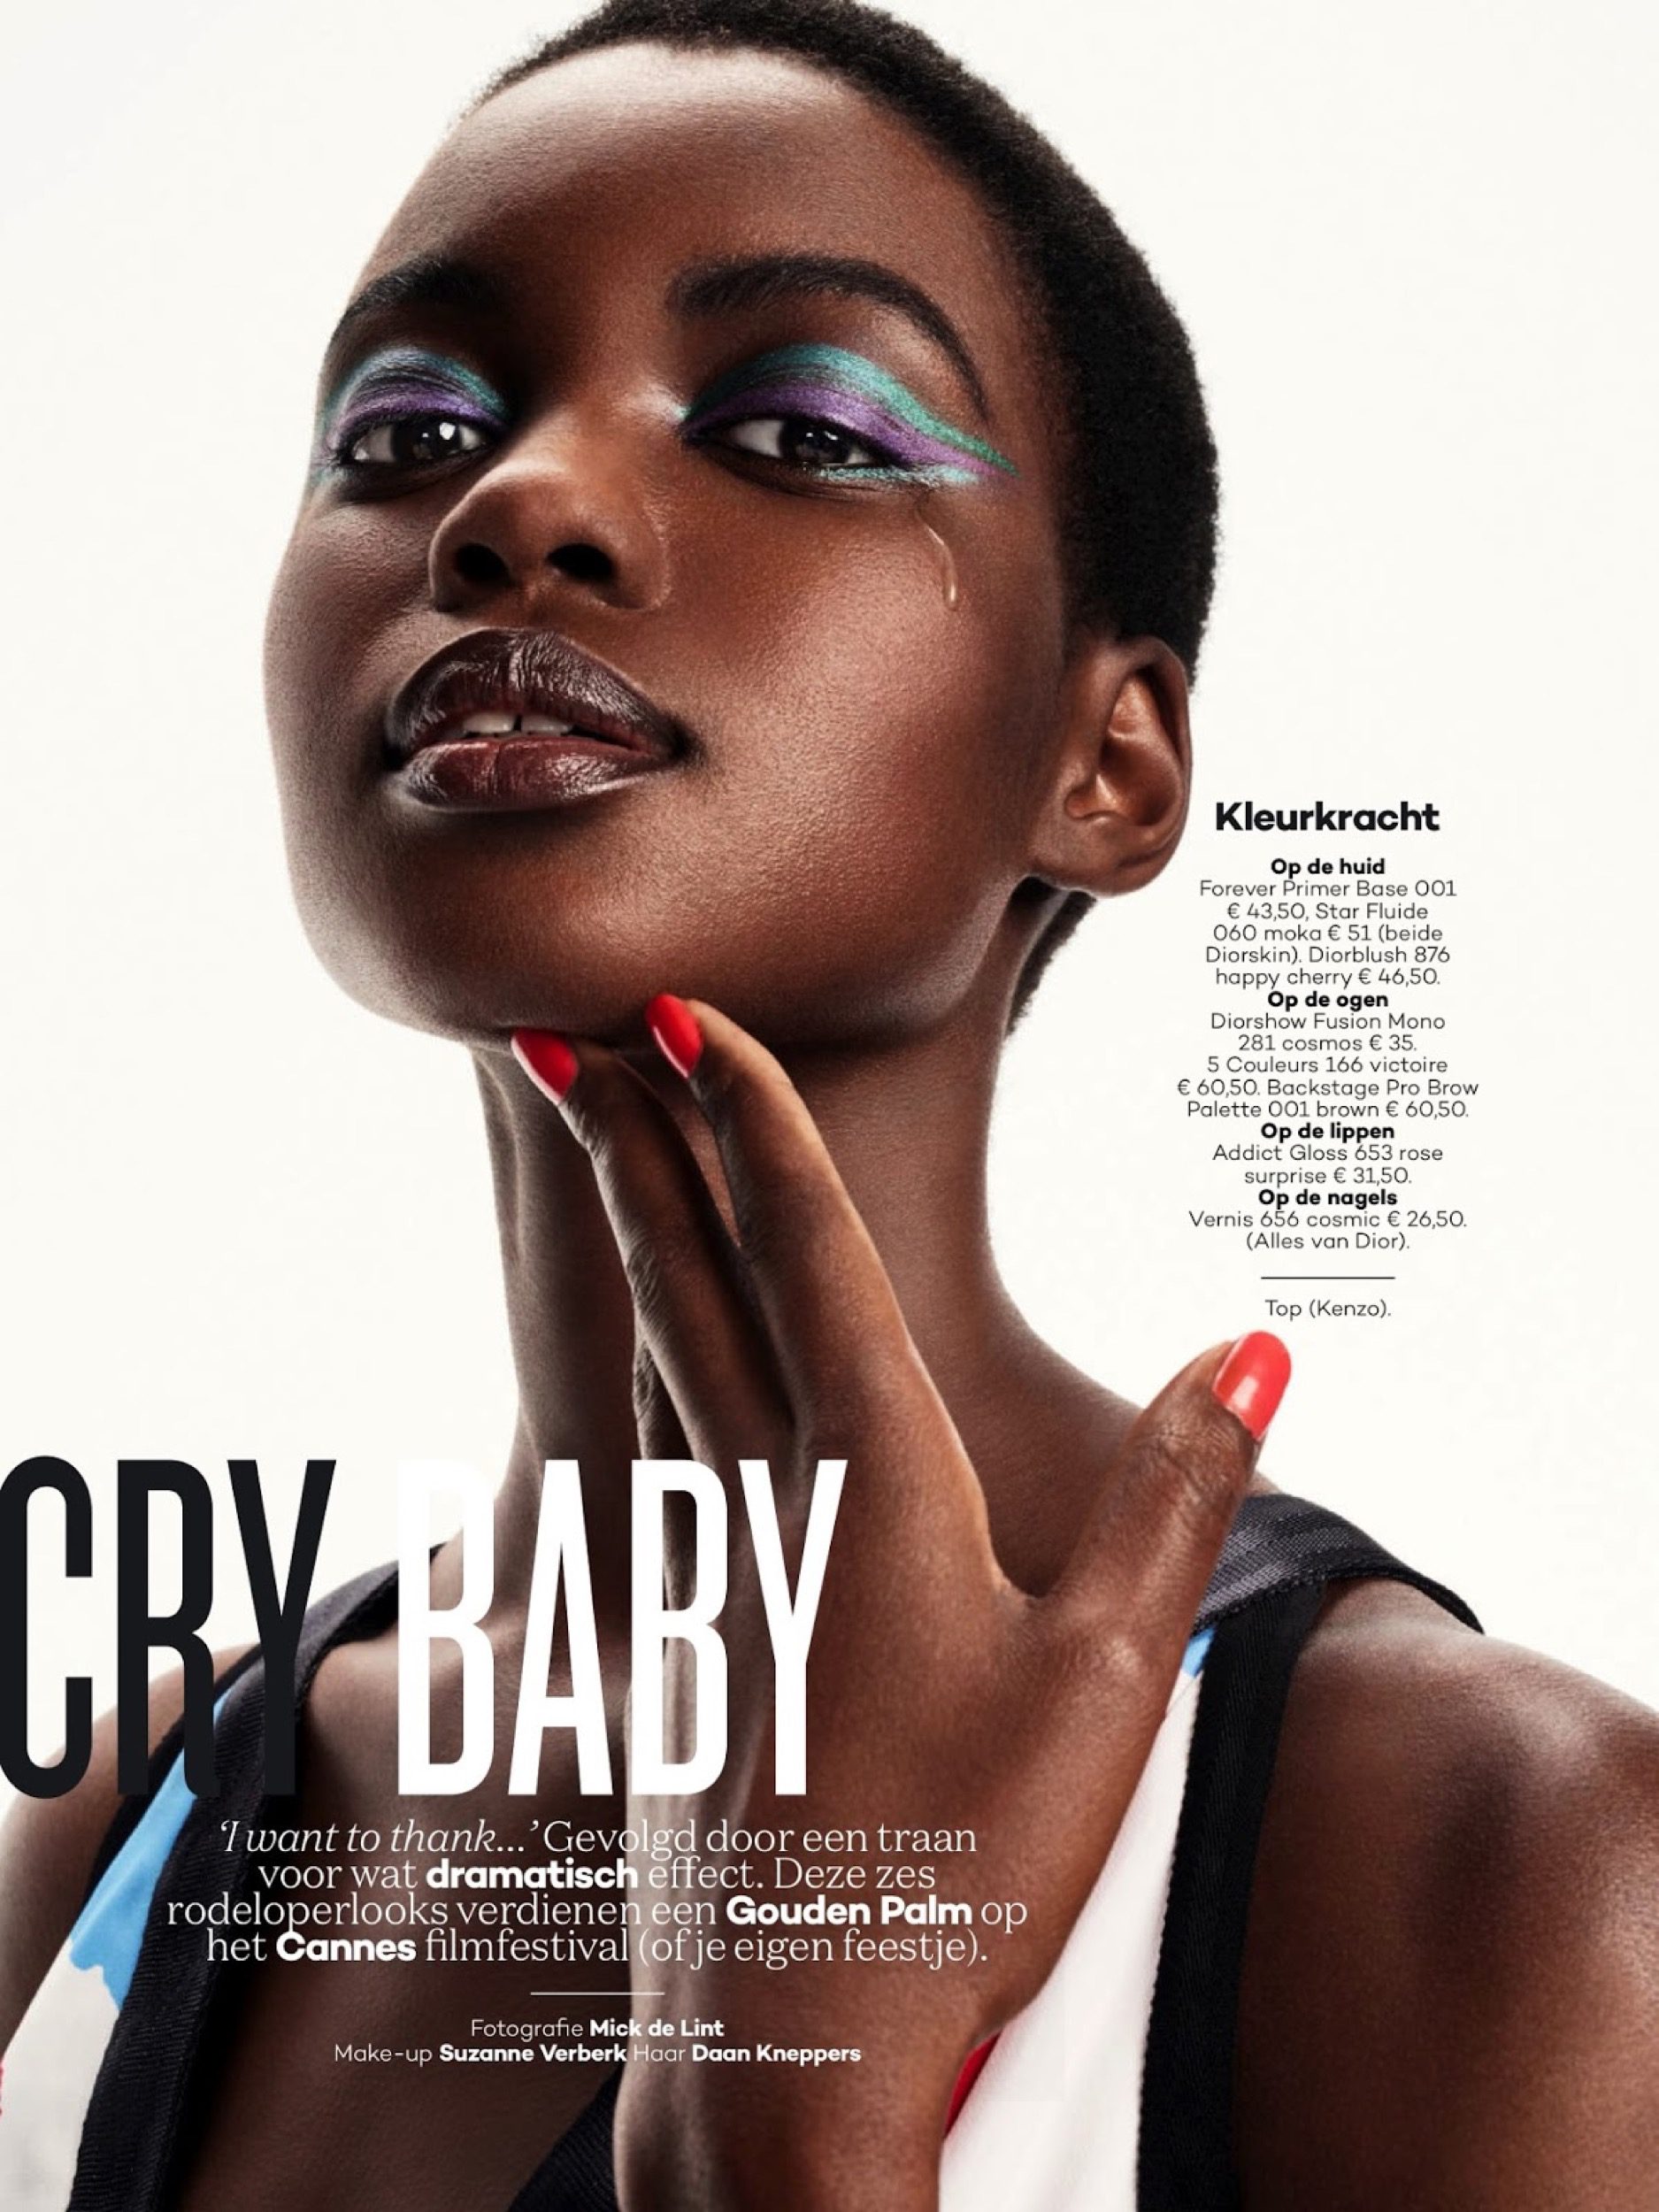 kathrin-hohberg-glamour-nl-cry-baby-mick-de-lint-01